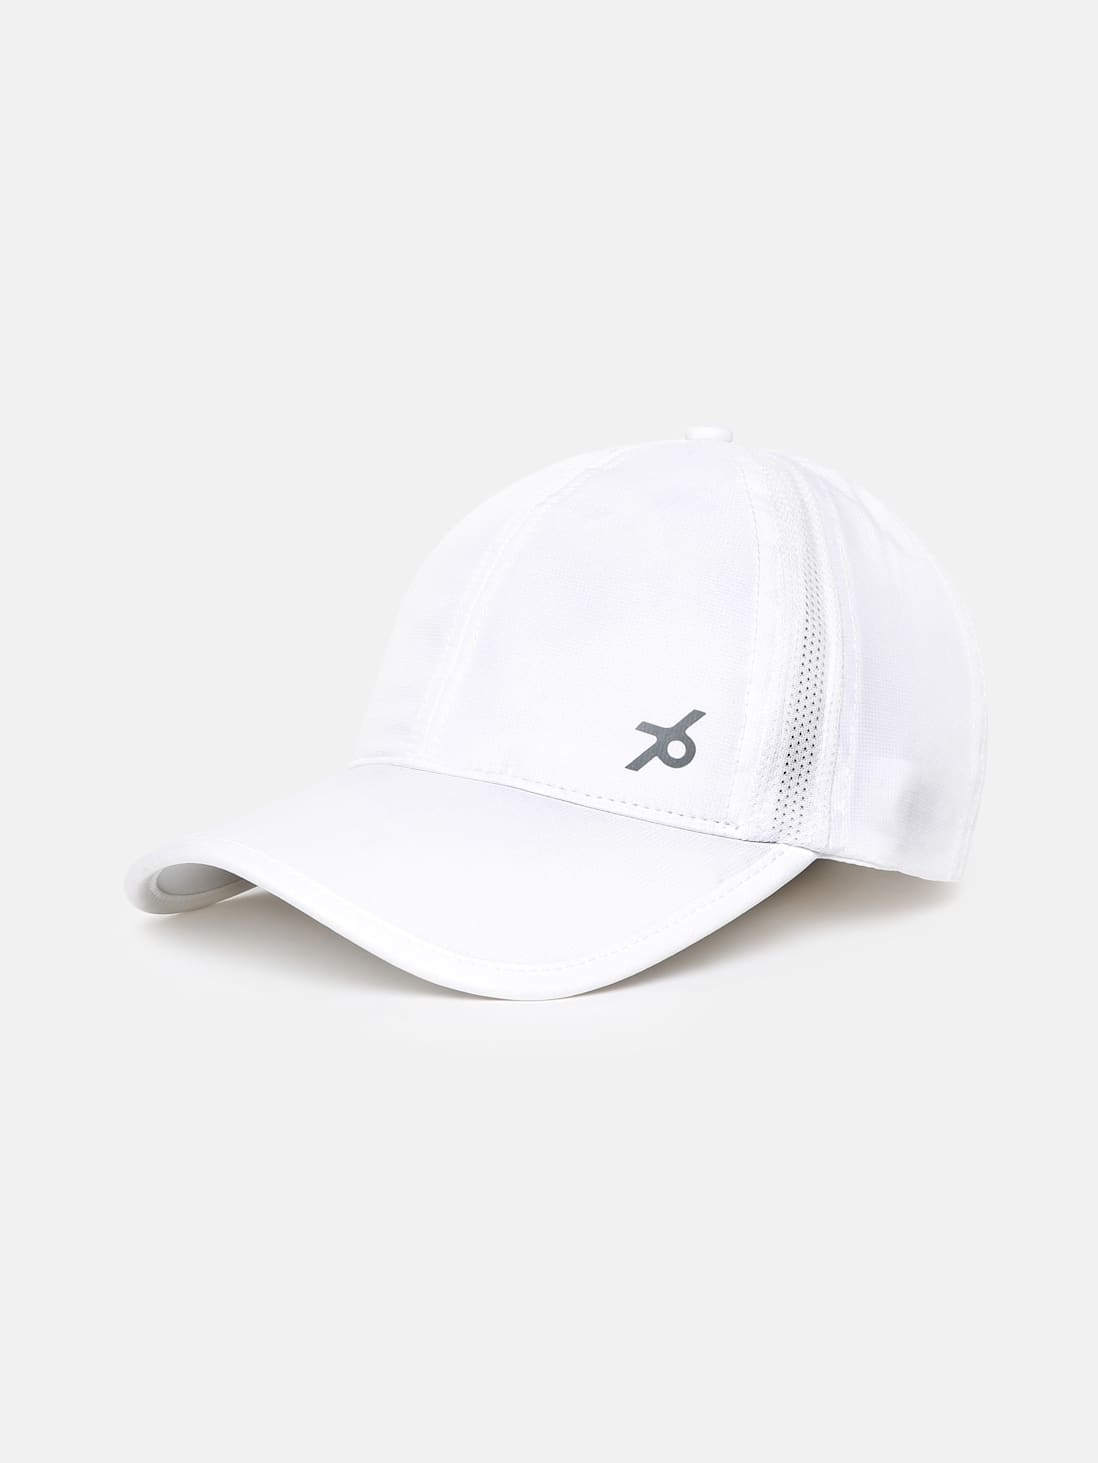 Buy Polyester Solid Cap with Adjustable Back Closure and Stay Dry  Technology - Move Blue CP21